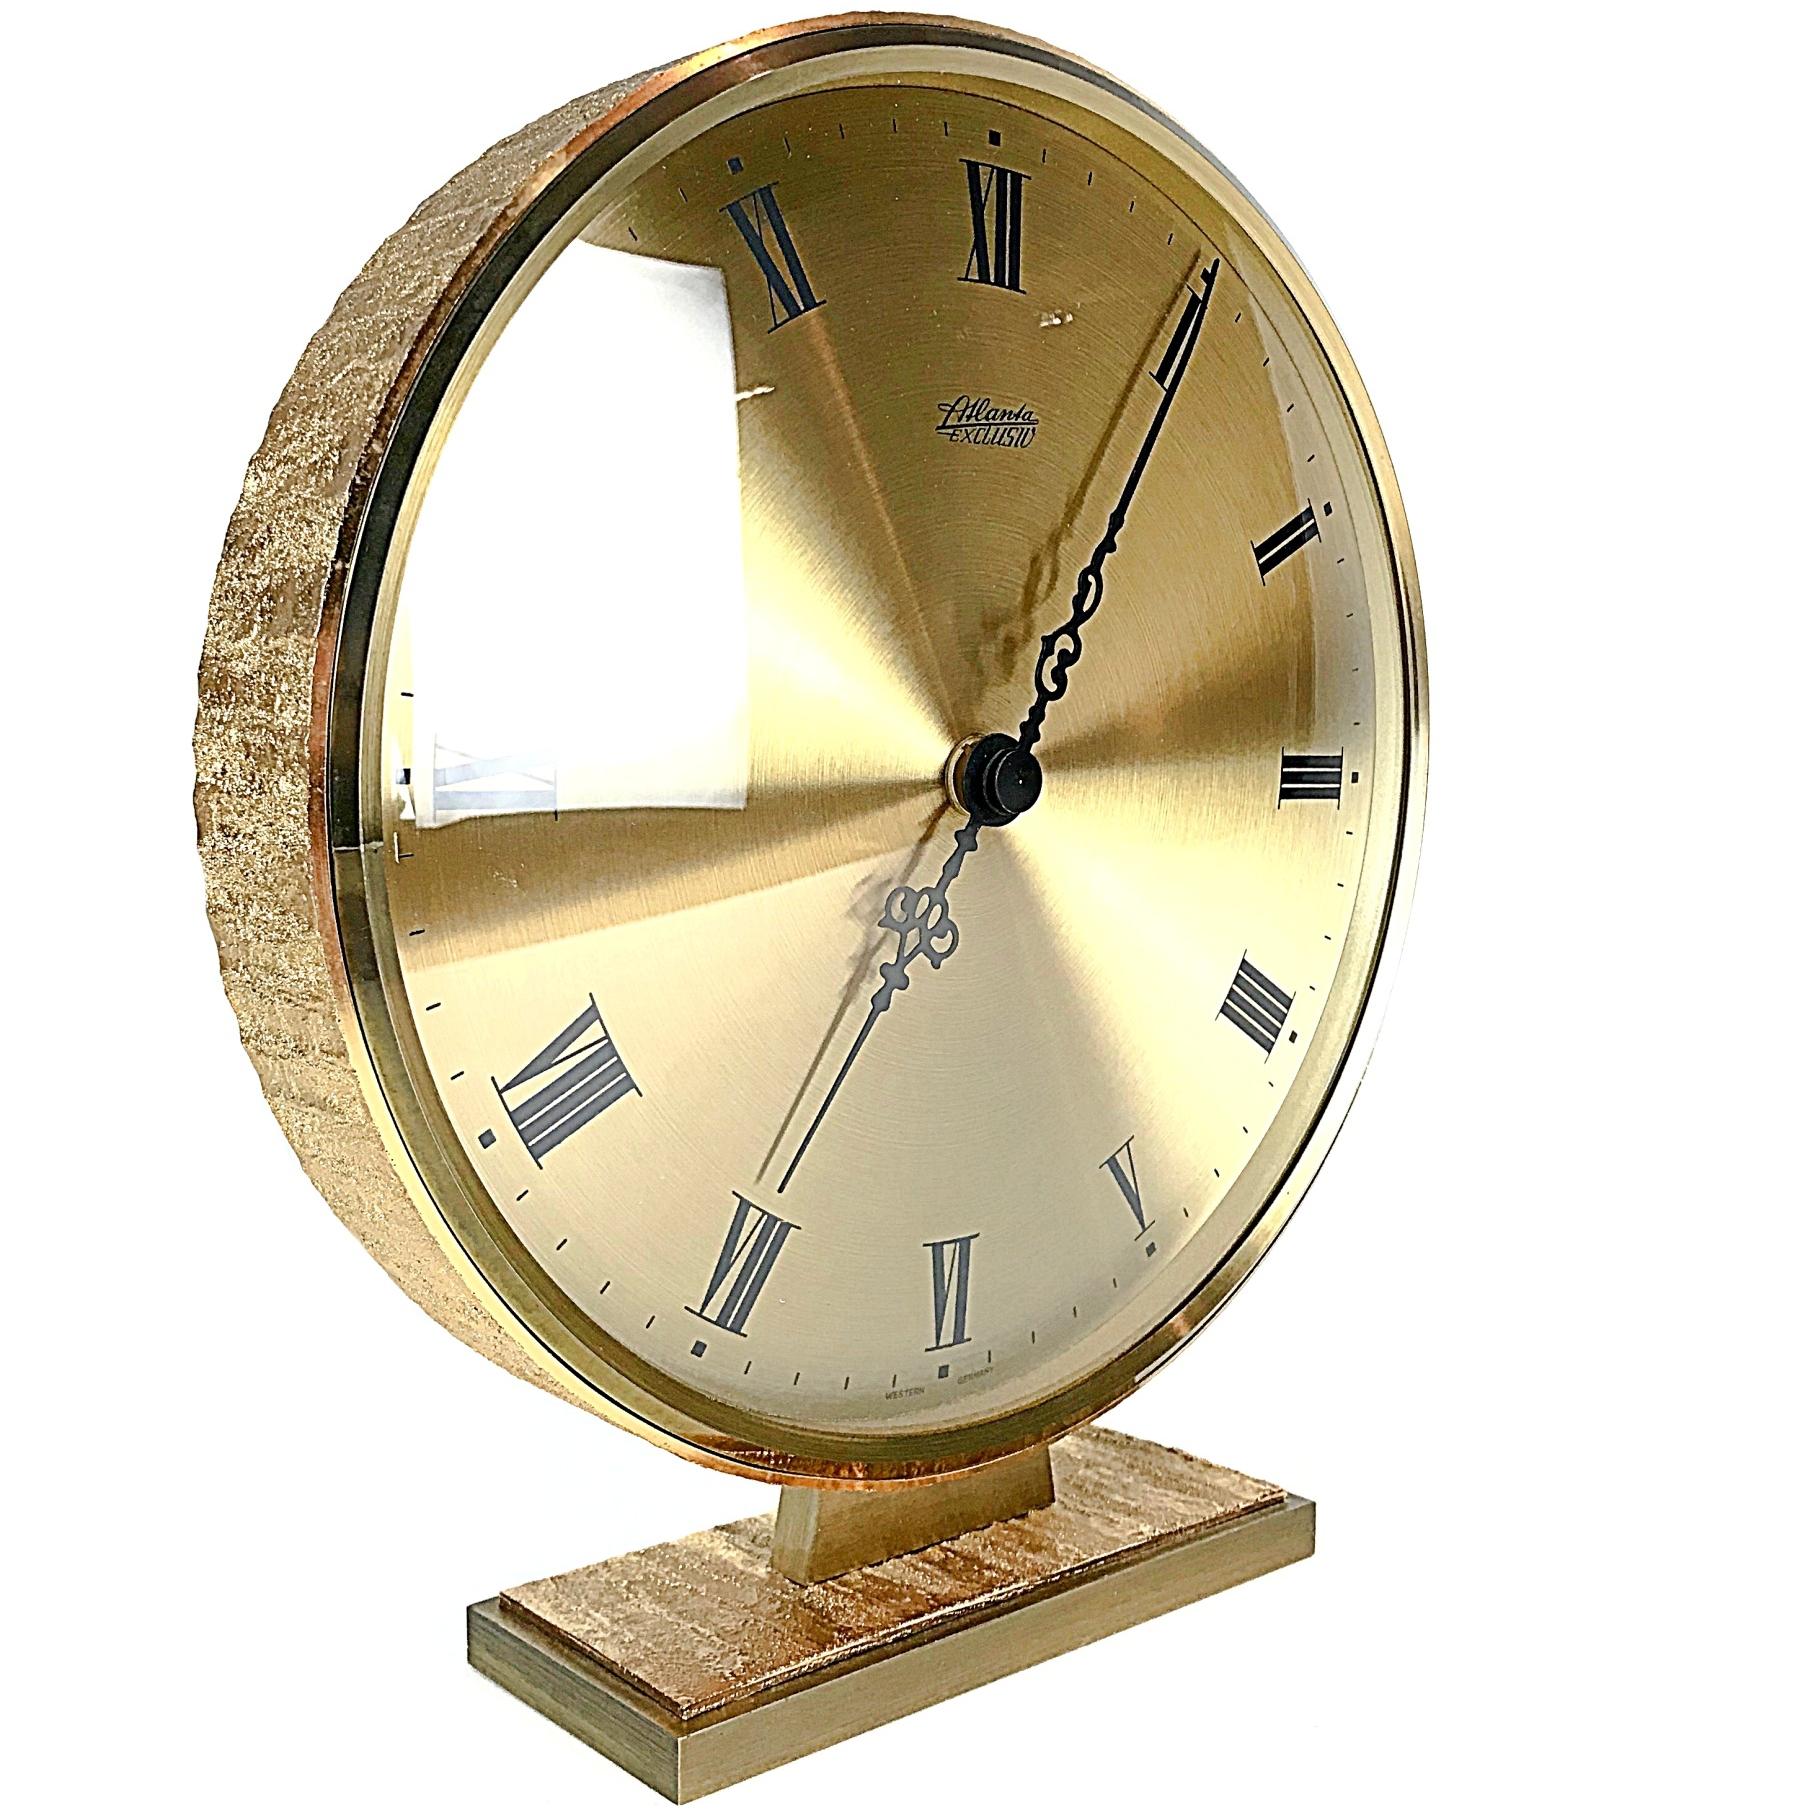 Impressive unique table clock made by Atlanta, West Germany in 1950s. Heavy slim-line brass body with glass front. Great condition with original Junghans quartz AAA battery mechanism.

Measures: 
Height 26 cm / 10.2 in. 
Diameter 24 cm / 9.8